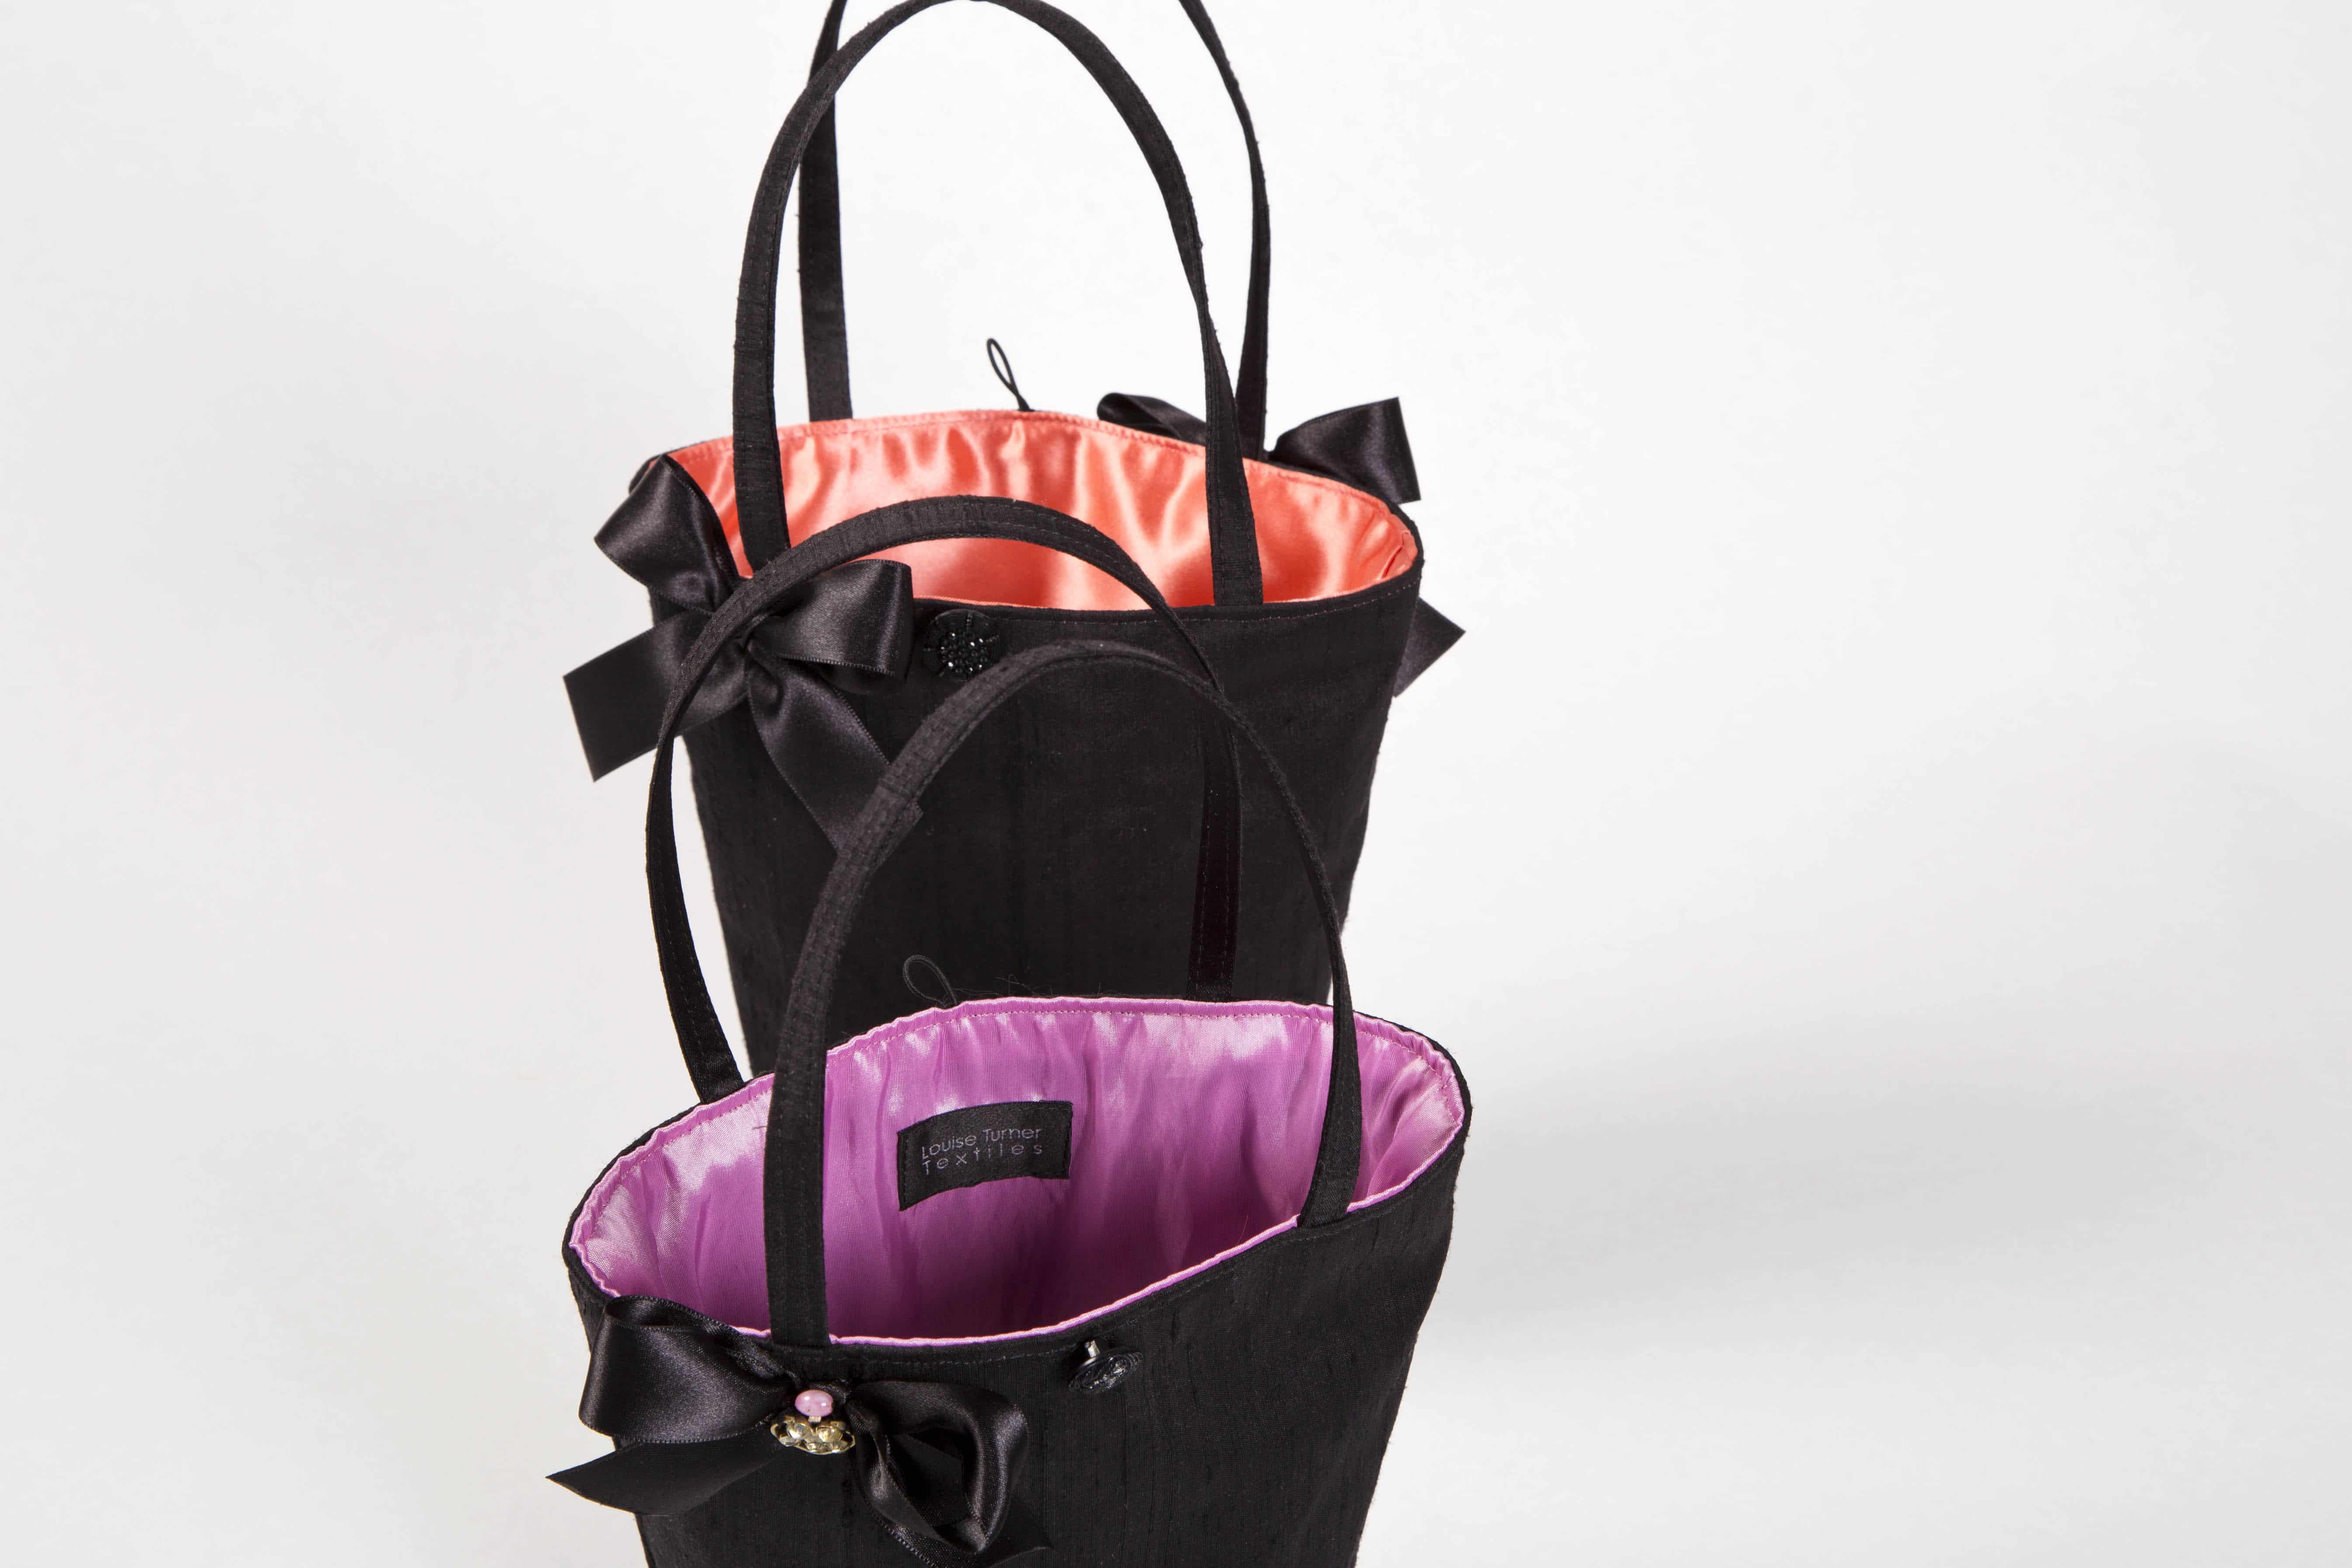 two black handbags with pink and orange linings